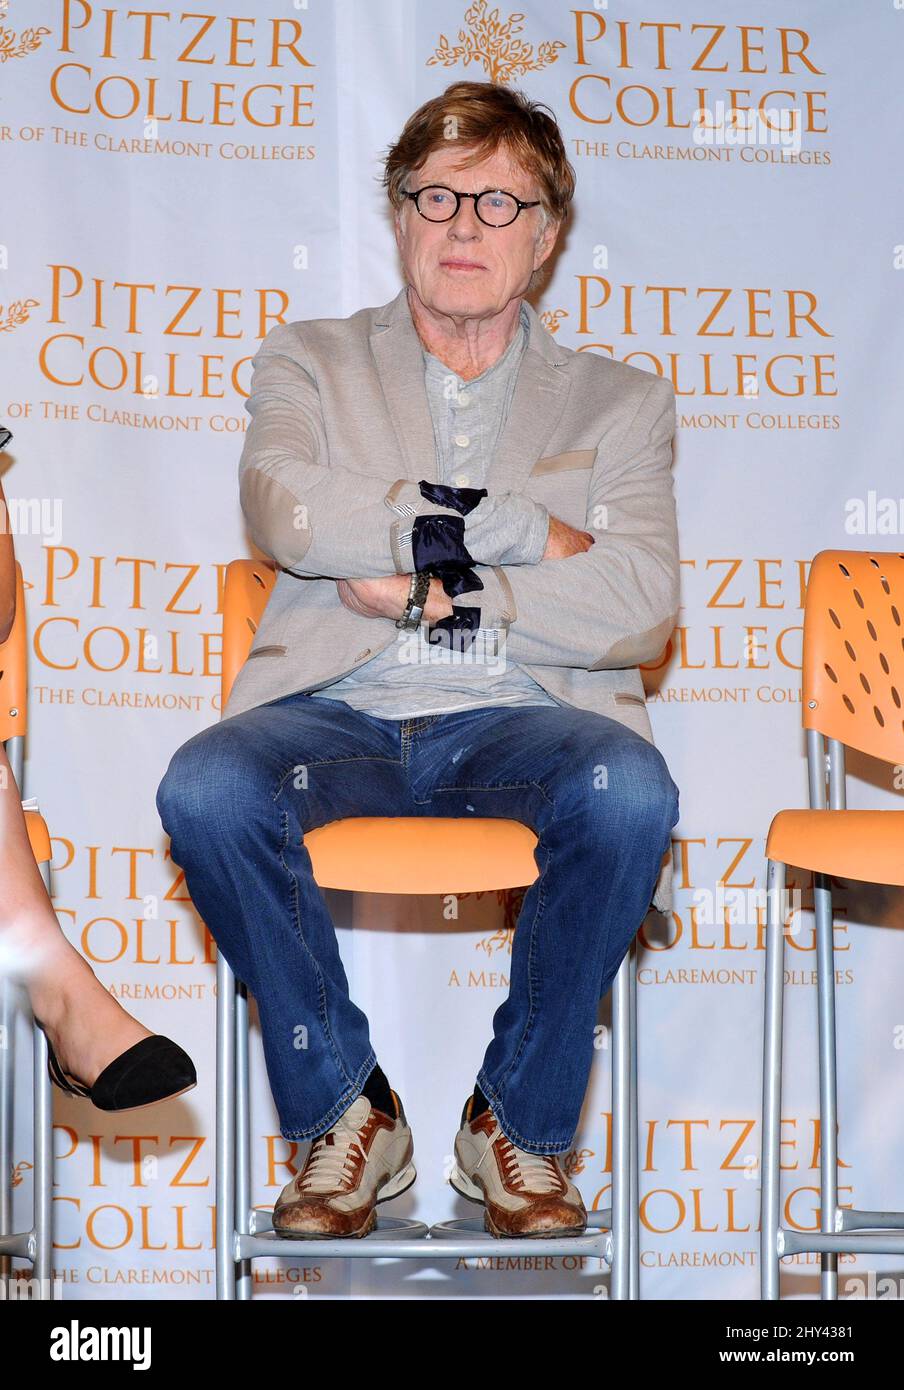 Robert Redford attending a press conference on fossil fuels held at the Los Angeles Press Club in Los Angeles, Califrornia. Stock Photo